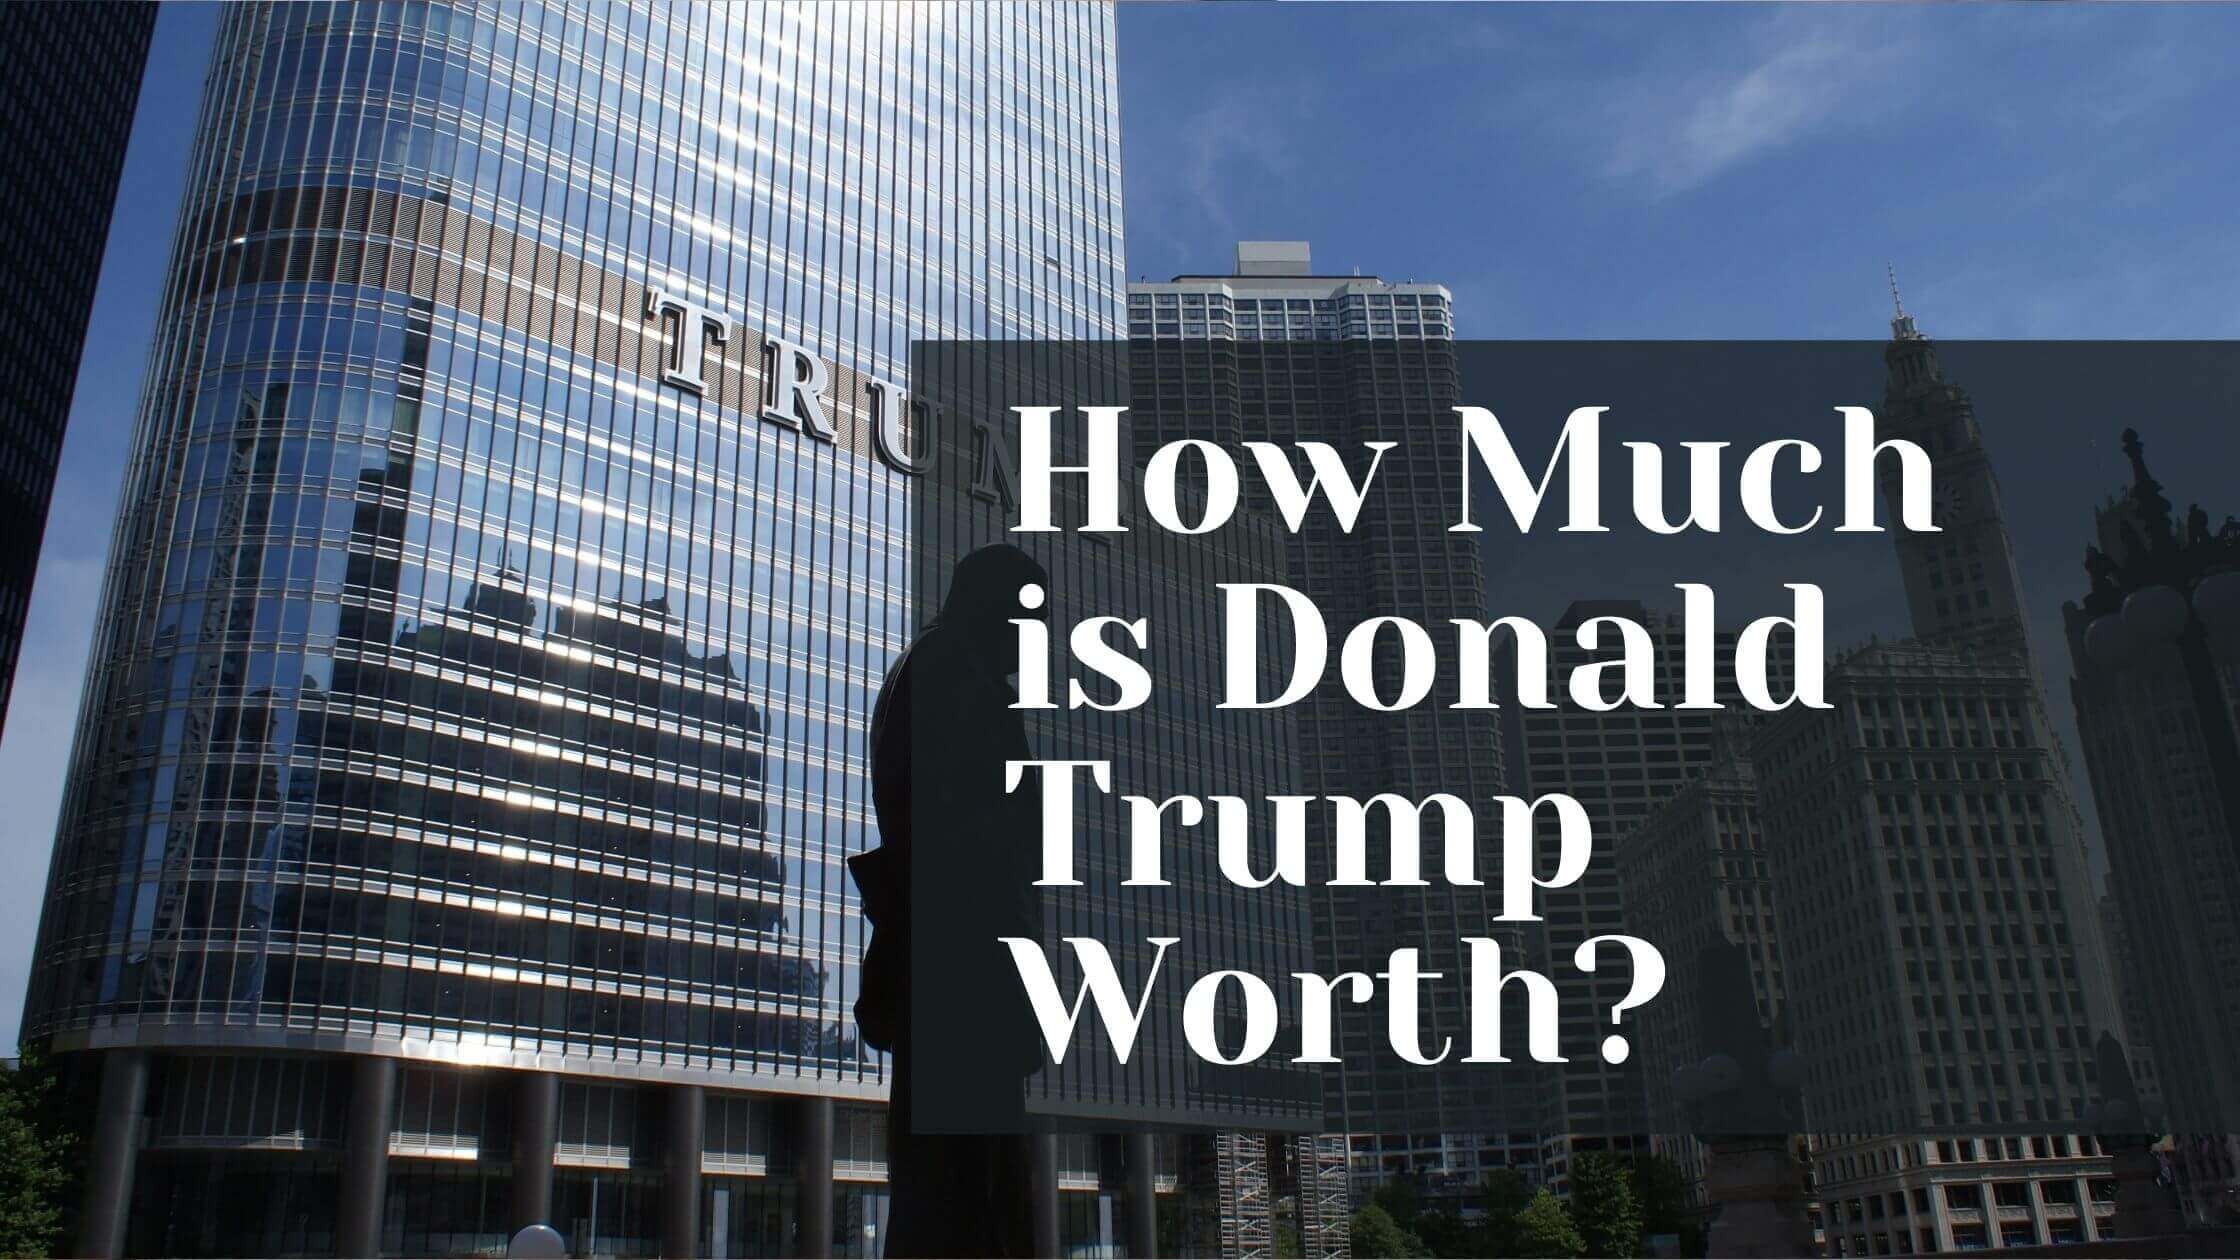 How Much is Donald Trump Worth?